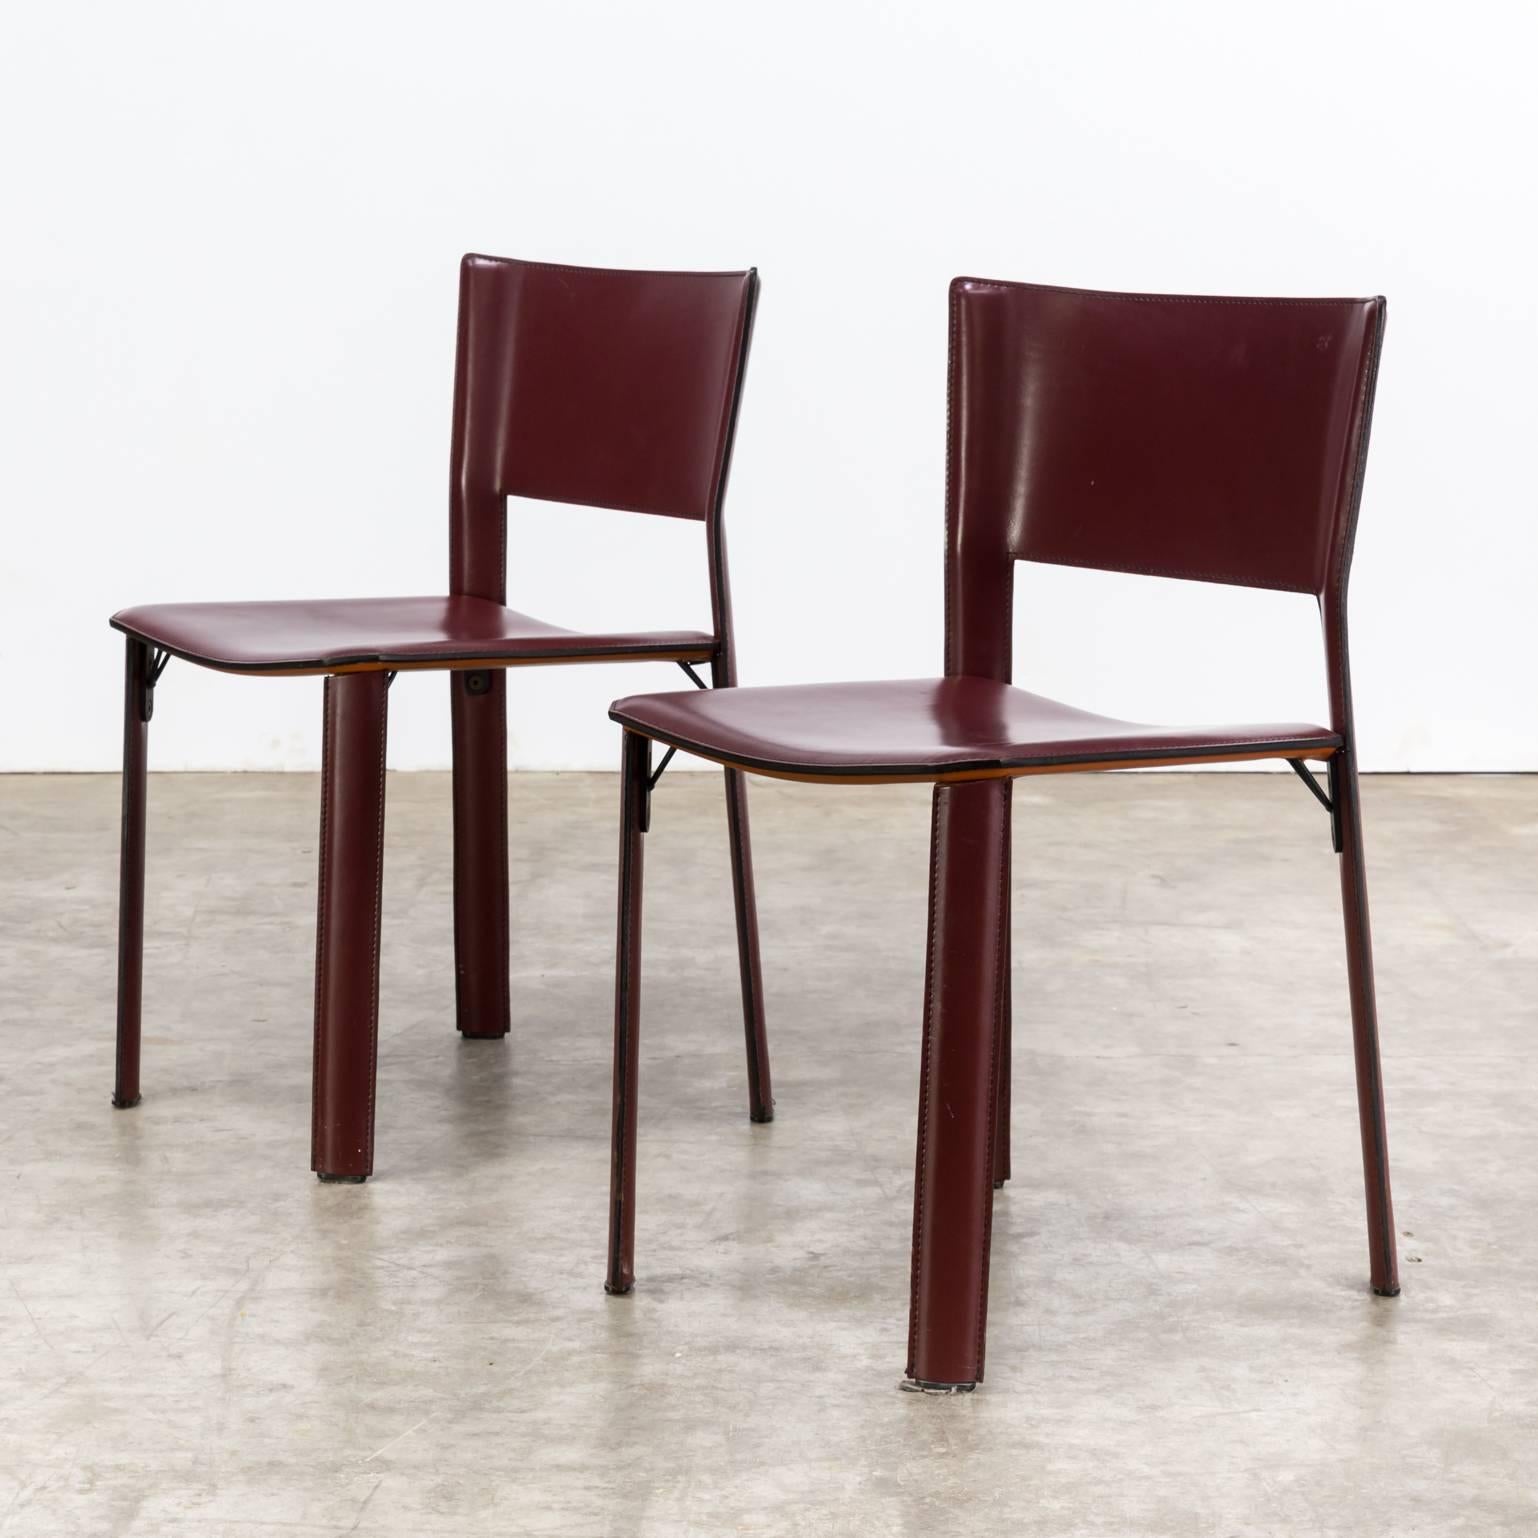 Giancarlo Vegni ‘S91’ chair for Fasem Italy set of two. Good condition consistent with age and use.